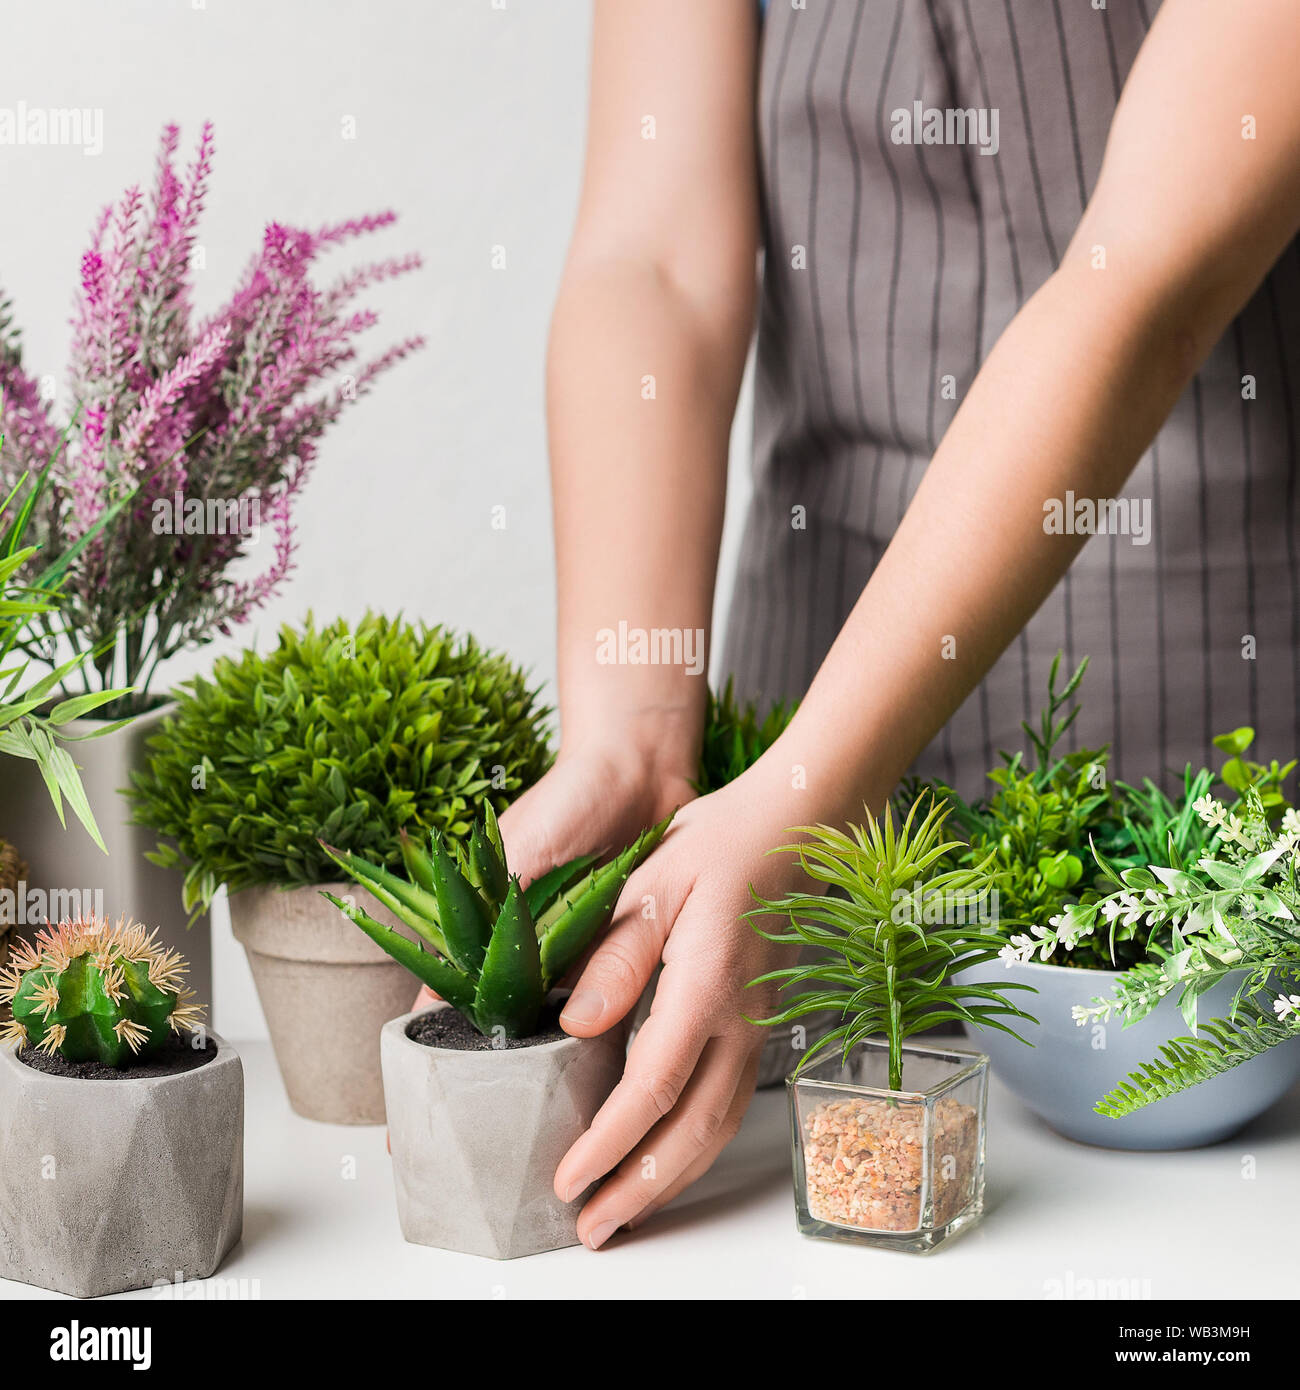 Woman looking after various potted houseplants, crop Stock Photo